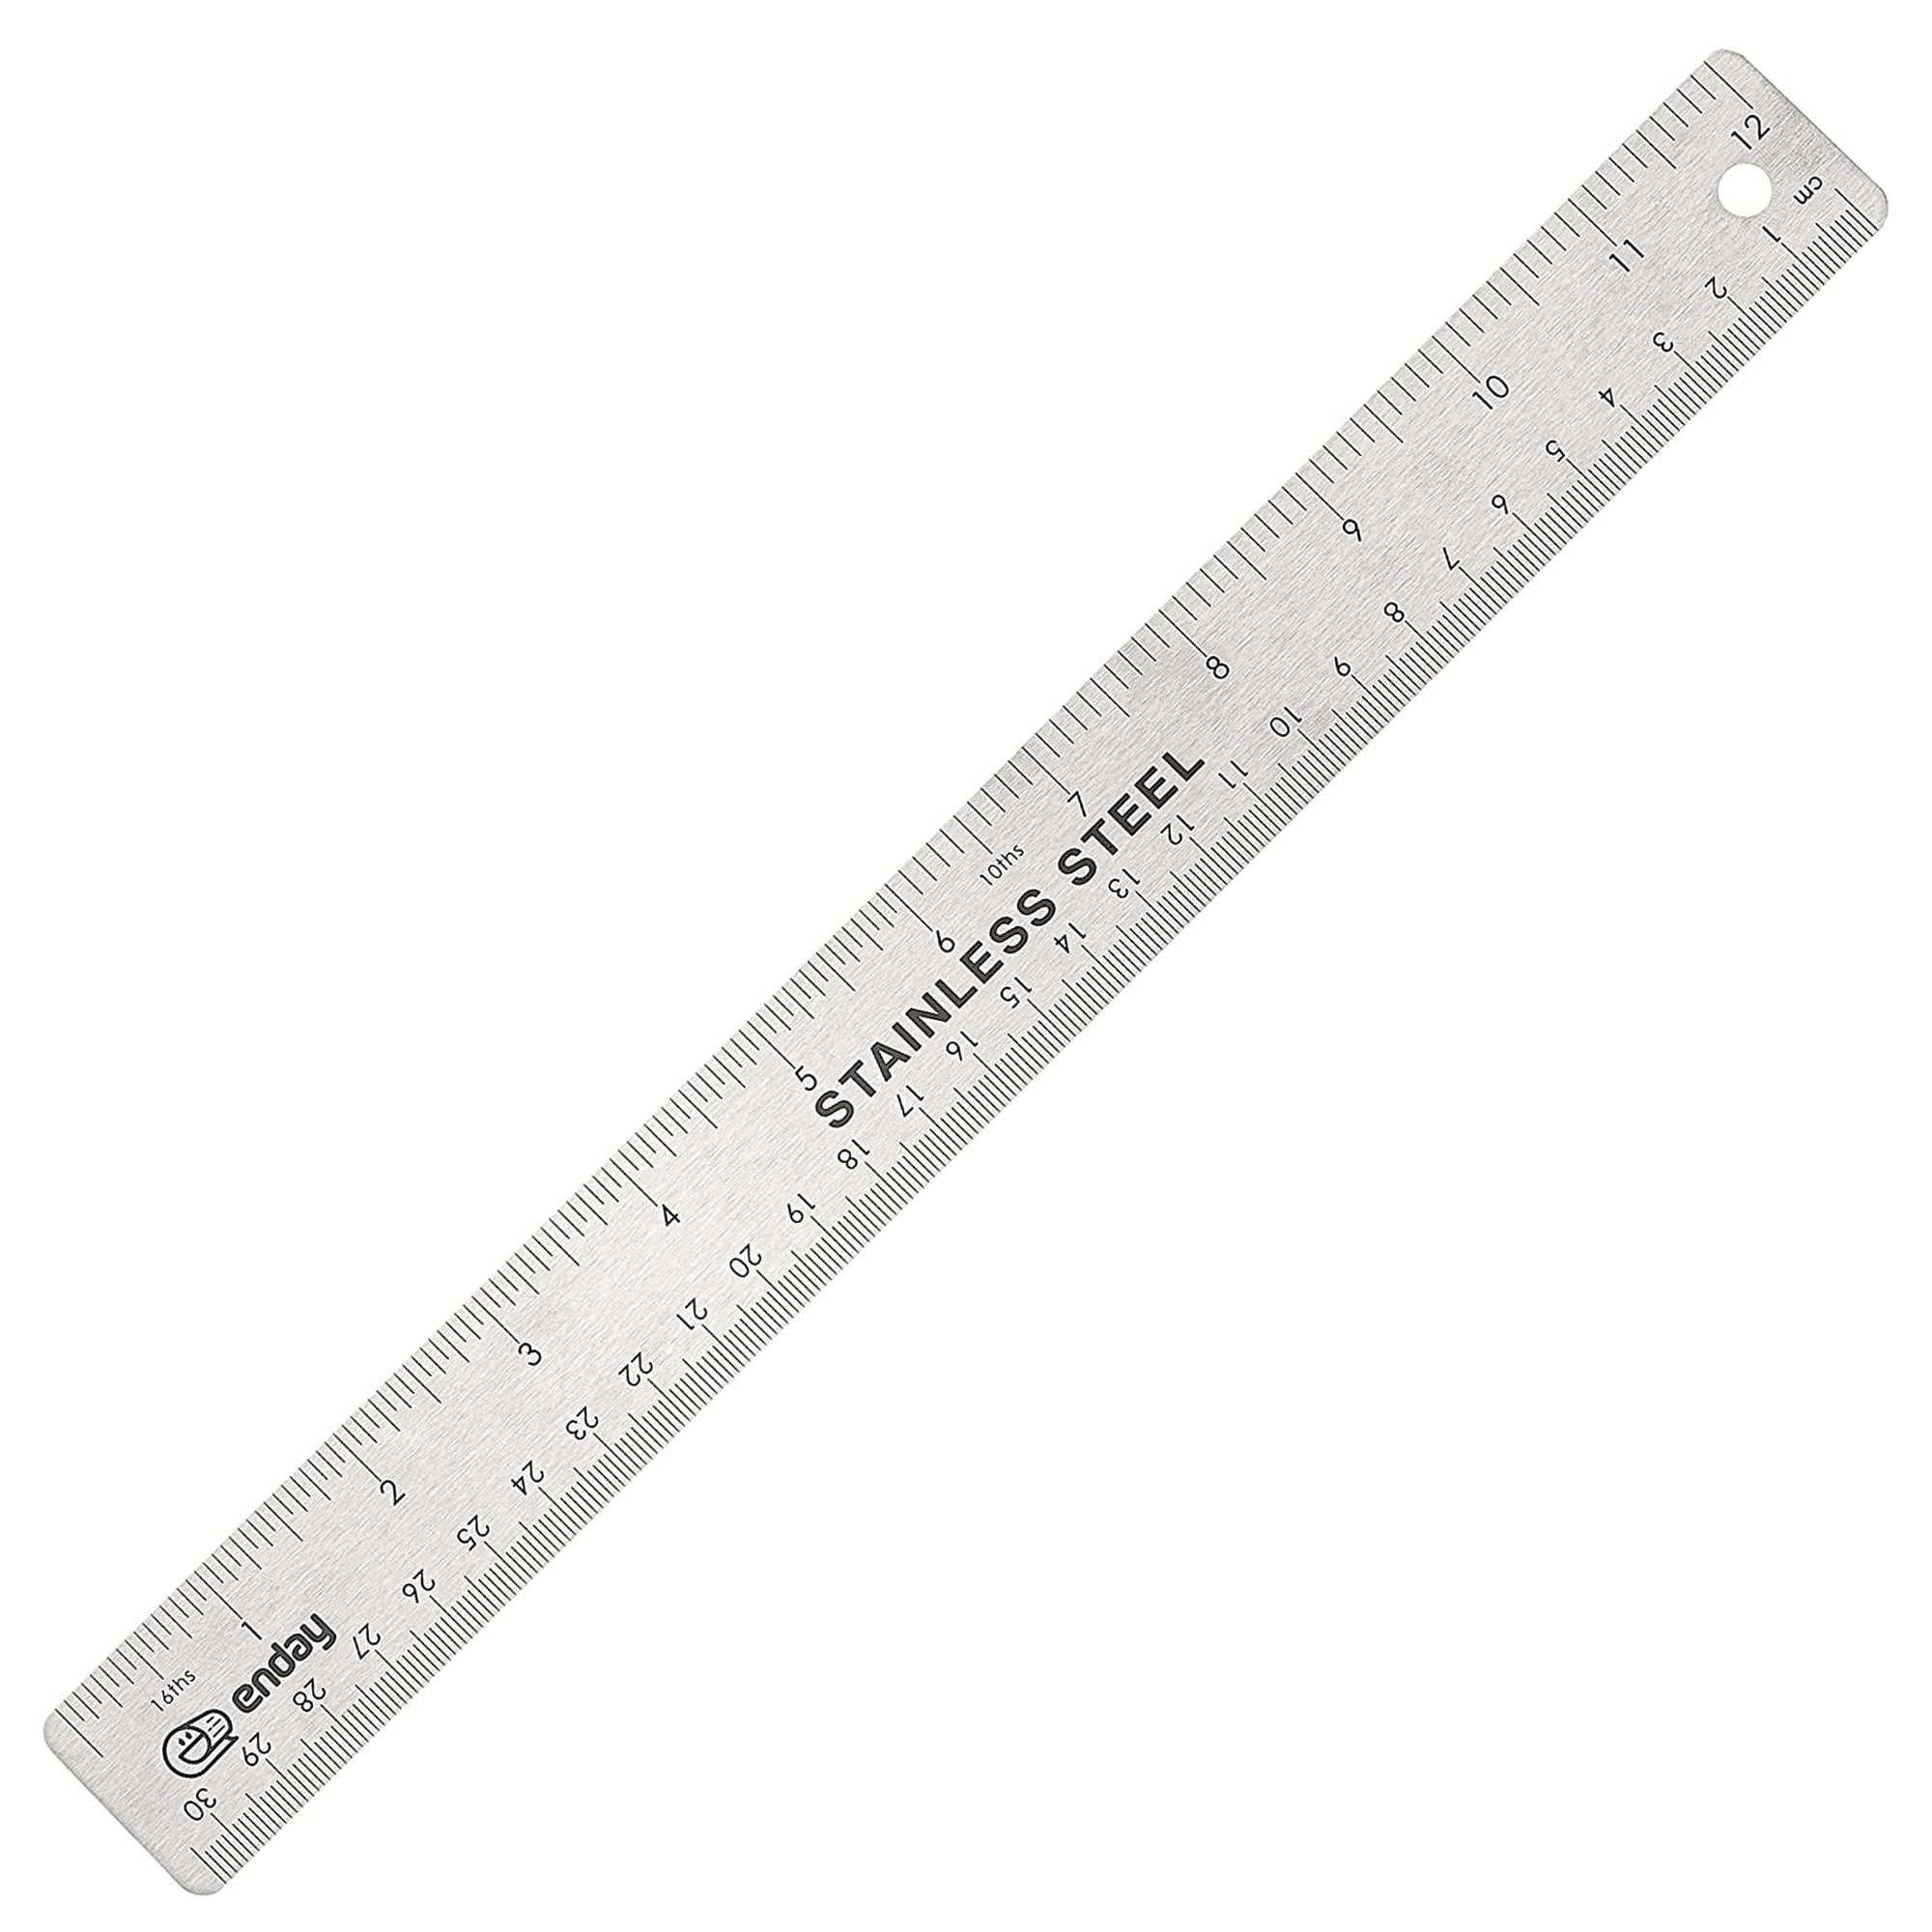 Enday Metal Ruler 12 Inch Stainless Steel Straight Edge Ruler, Pack of 1